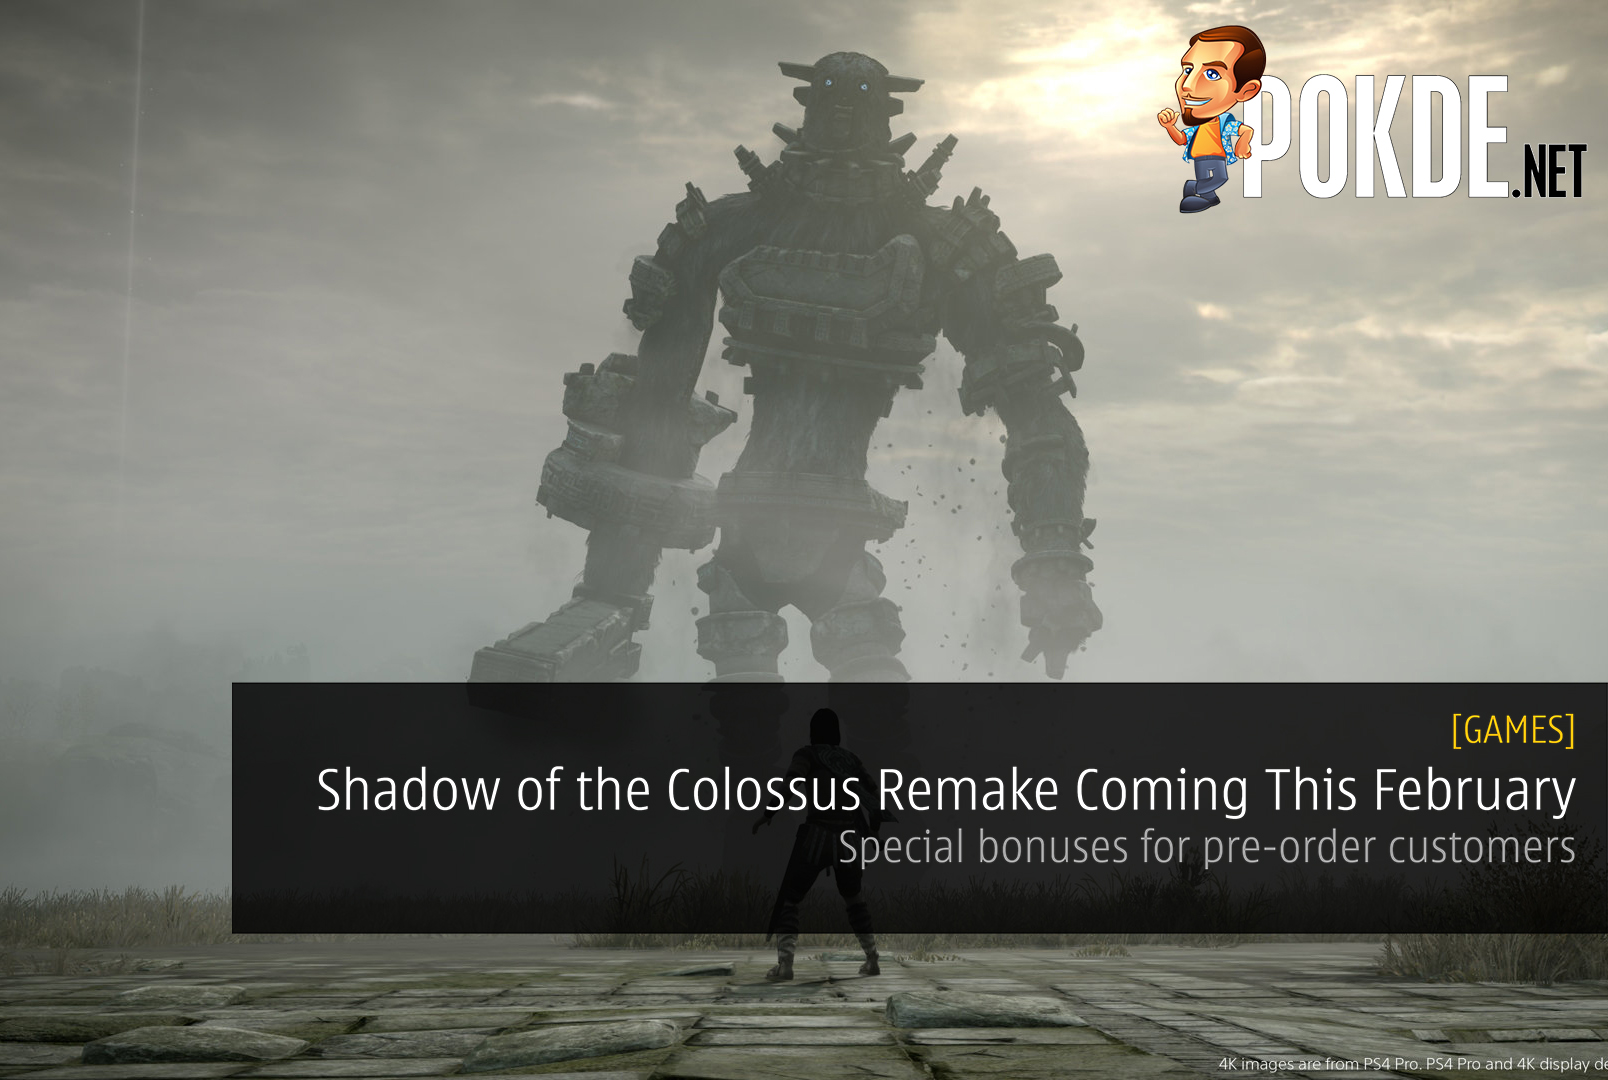 Shadow of the Colossus Remake Coming To The PS4 This February - Special bonuses for pre-order customers 30